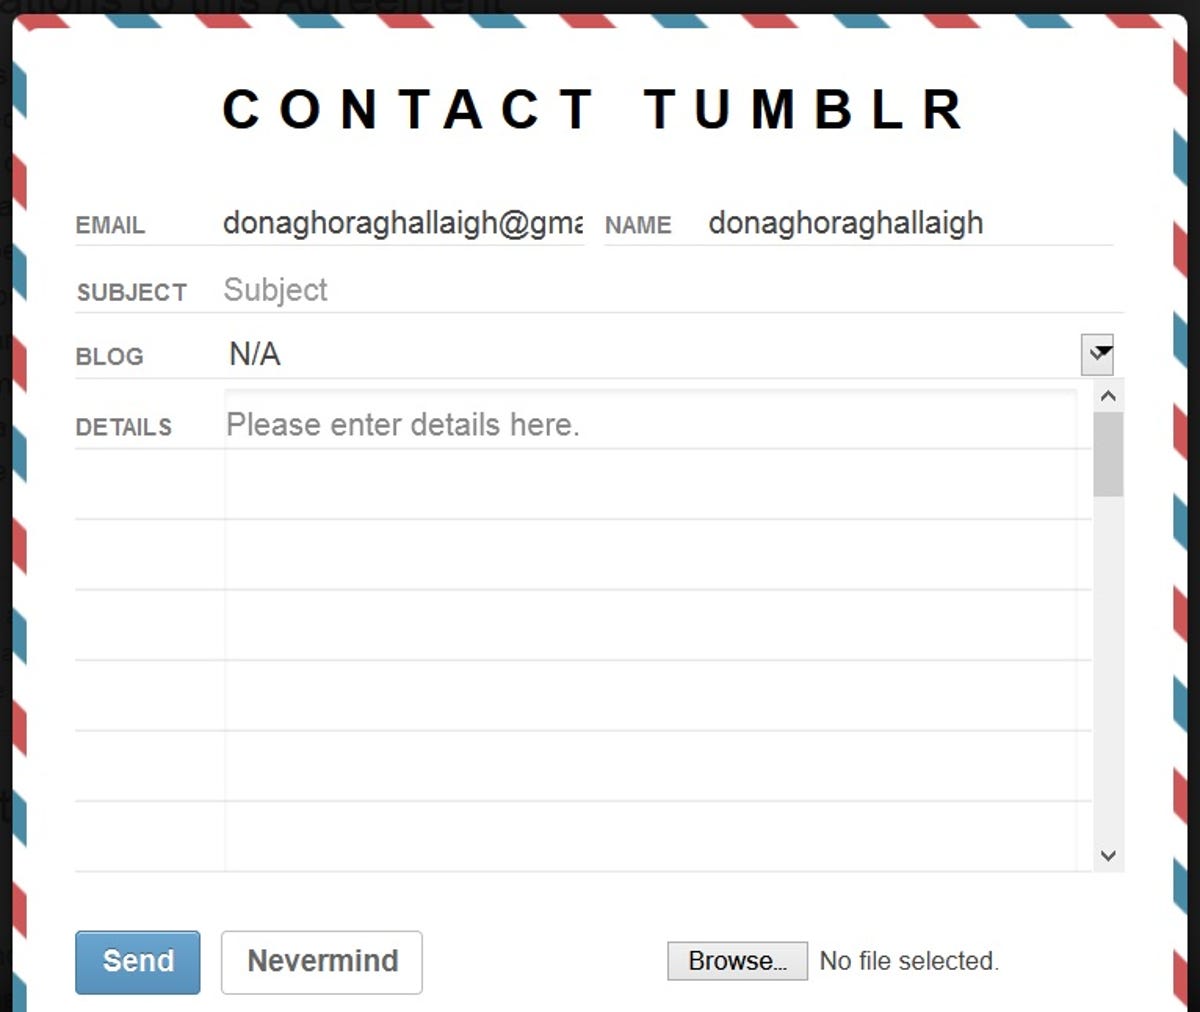 Tumblr contact form